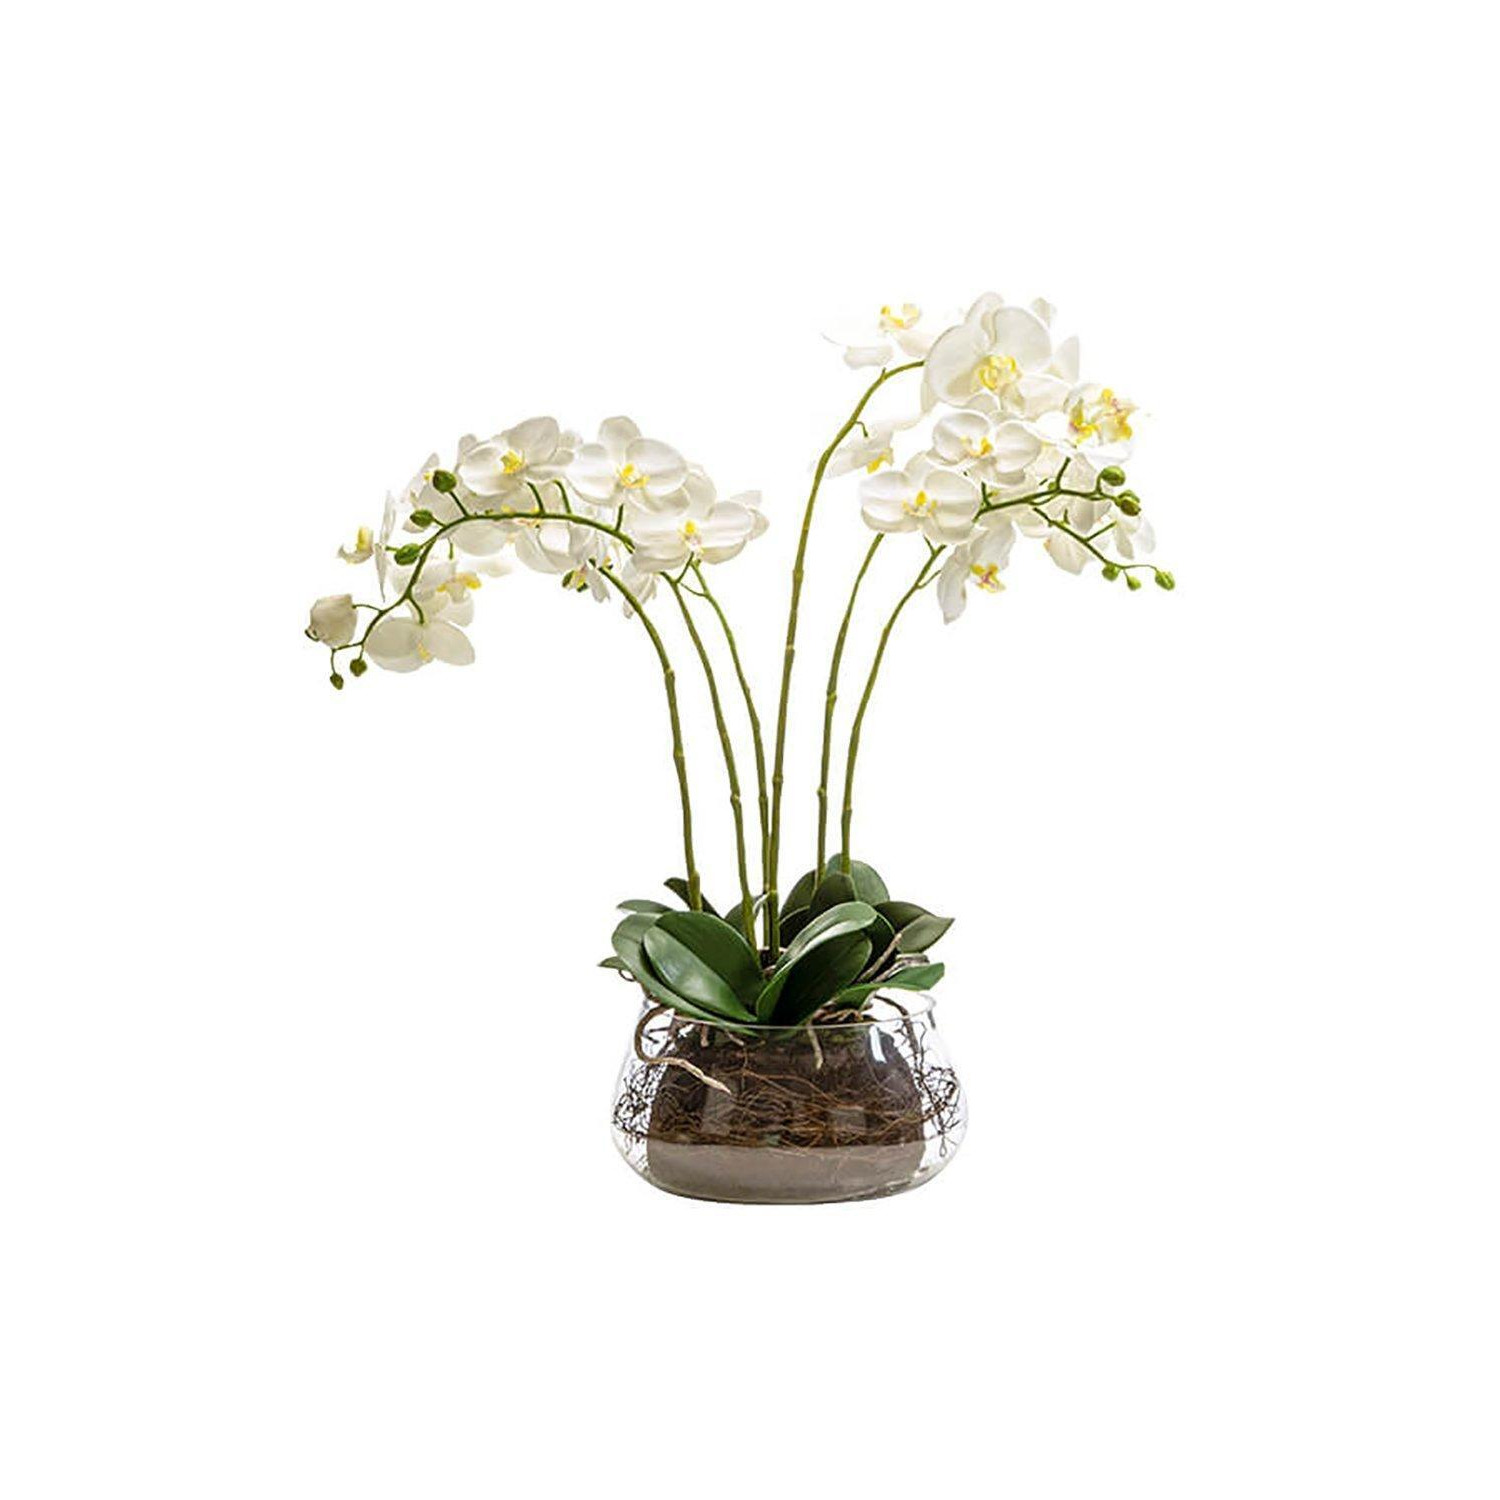 Orchid in Fishbowl - image 1